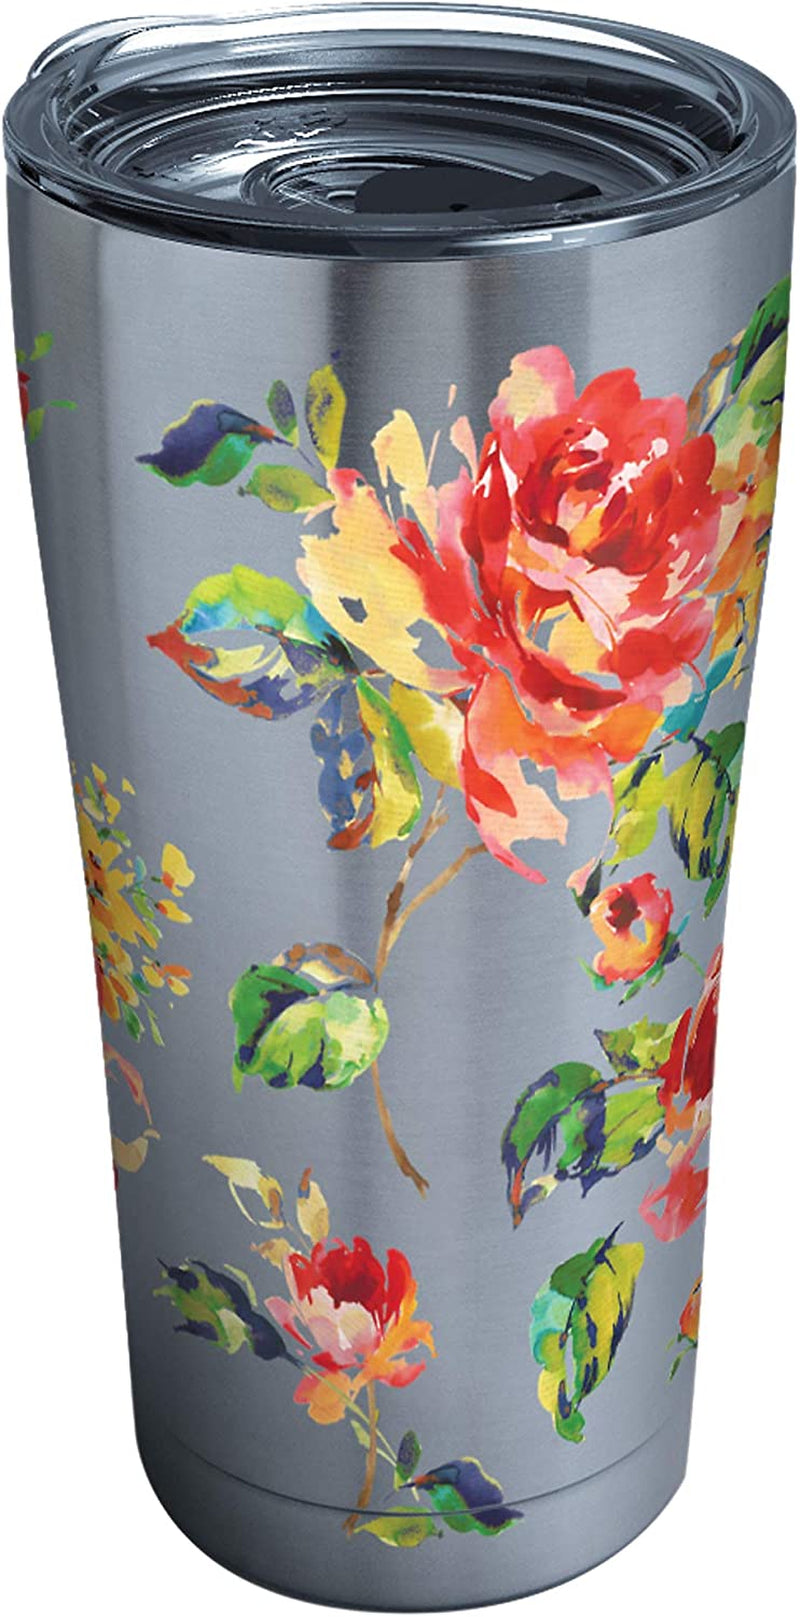 Tervis Triple Walled Fiesta Insulated Tumbler Cup Keeps Drinks Cold & Hot, 20Oz - Stainless Steel, Floral Bouquet Home & Garden > Kitchen & Dining > Tableware > Drinkware Tervis Stainless Steel 20oz 